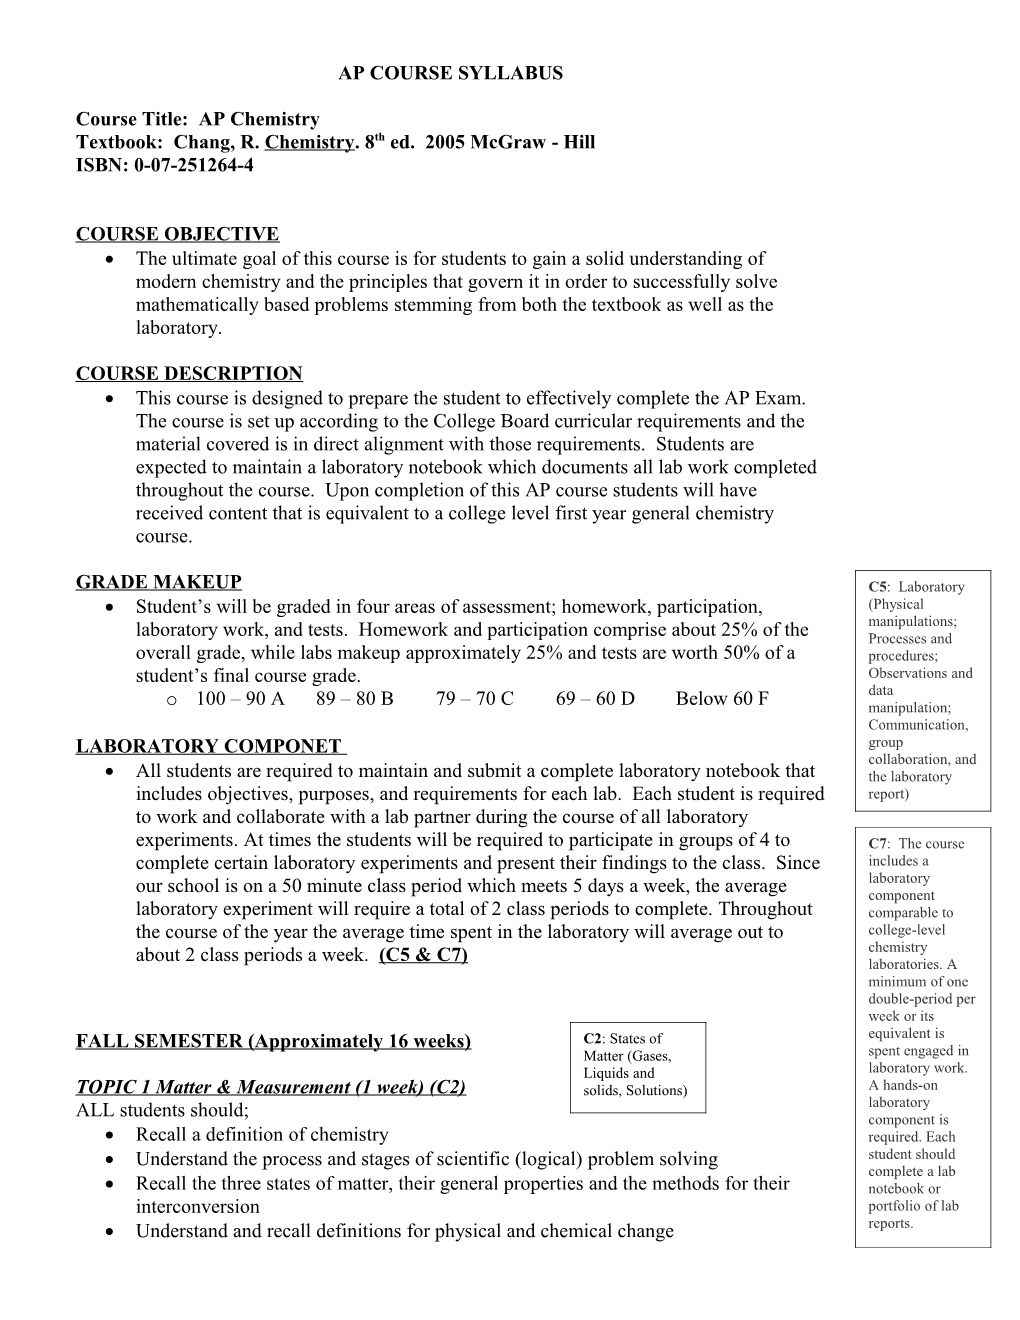 Adrian Dingle's Chemistry Pages - Advanced Placement Course Syllabus Objectives and Test